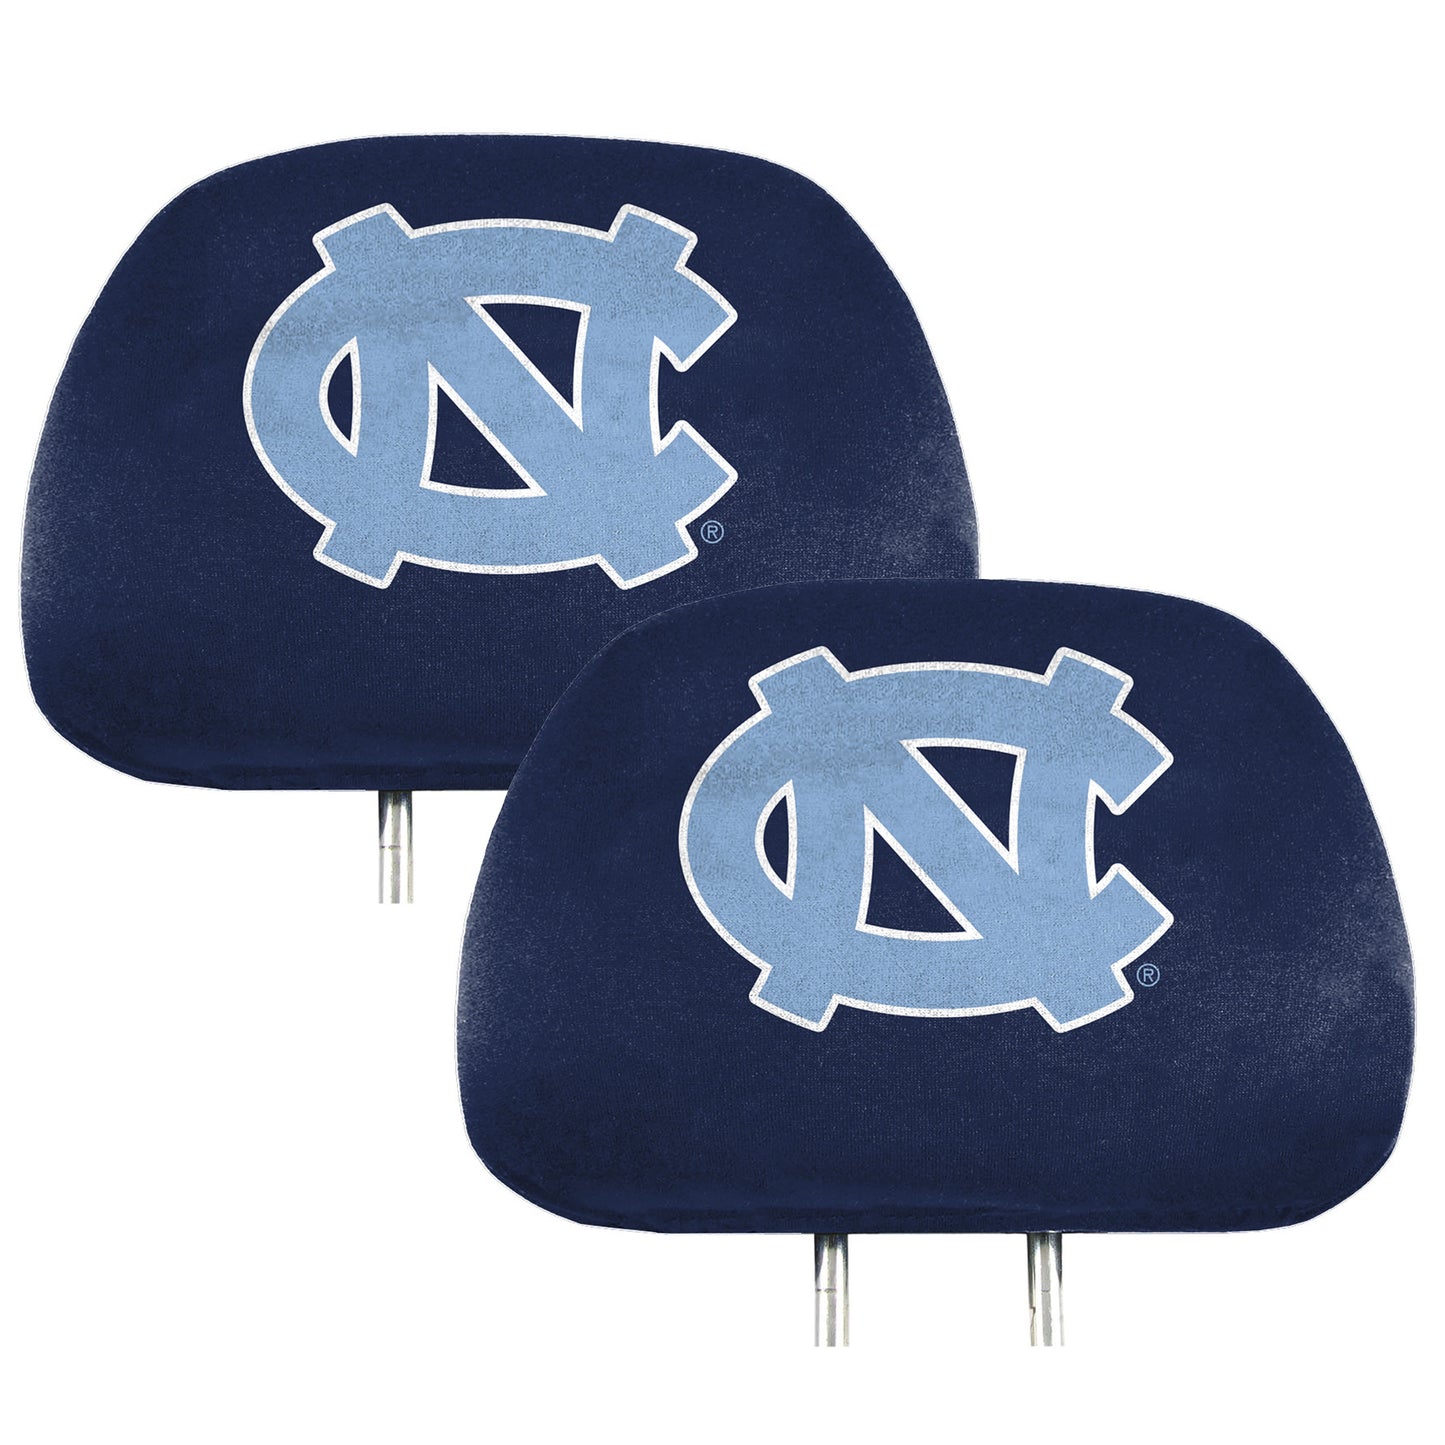 North Carolina Tar Heels Printed Headrest Cover with NC Primary Logo by Fanmats